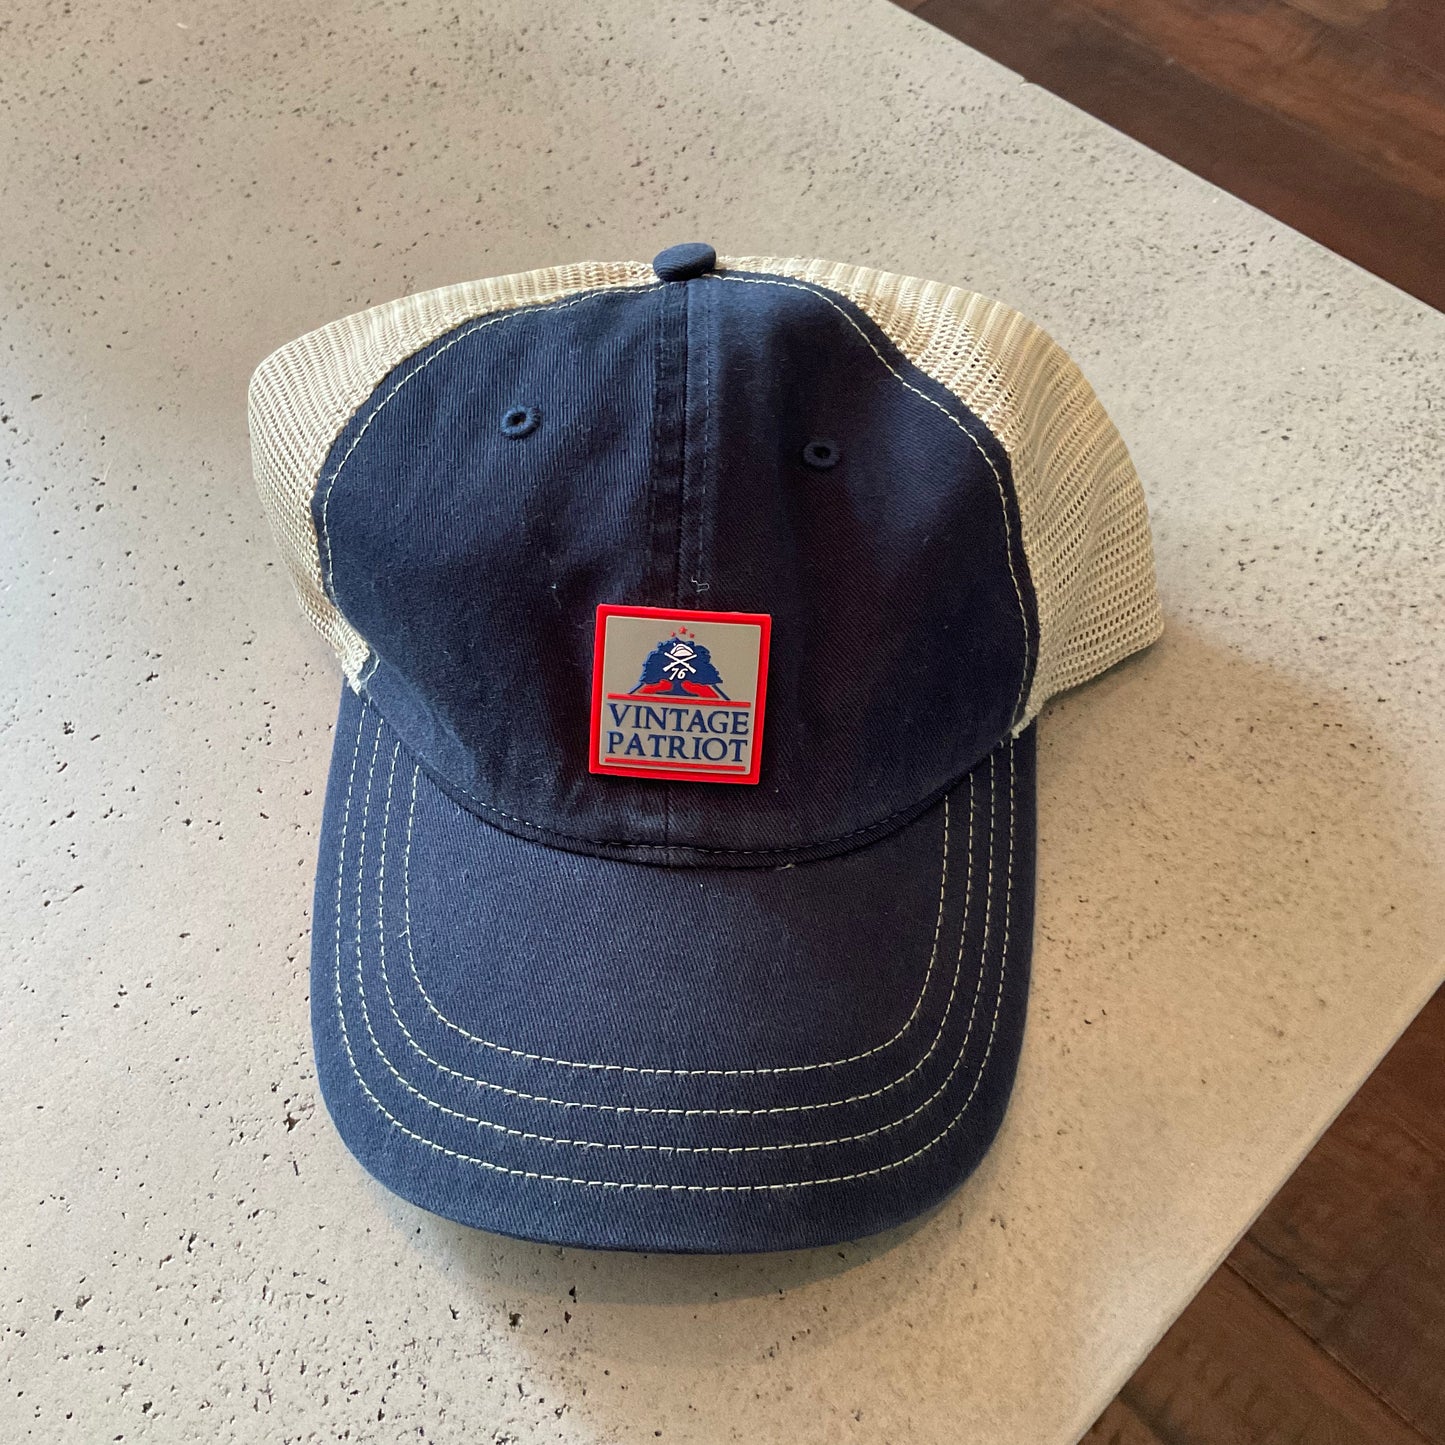 Unstructured Trucker Hat with a Rubber Vintage Patriot House Logo Patch